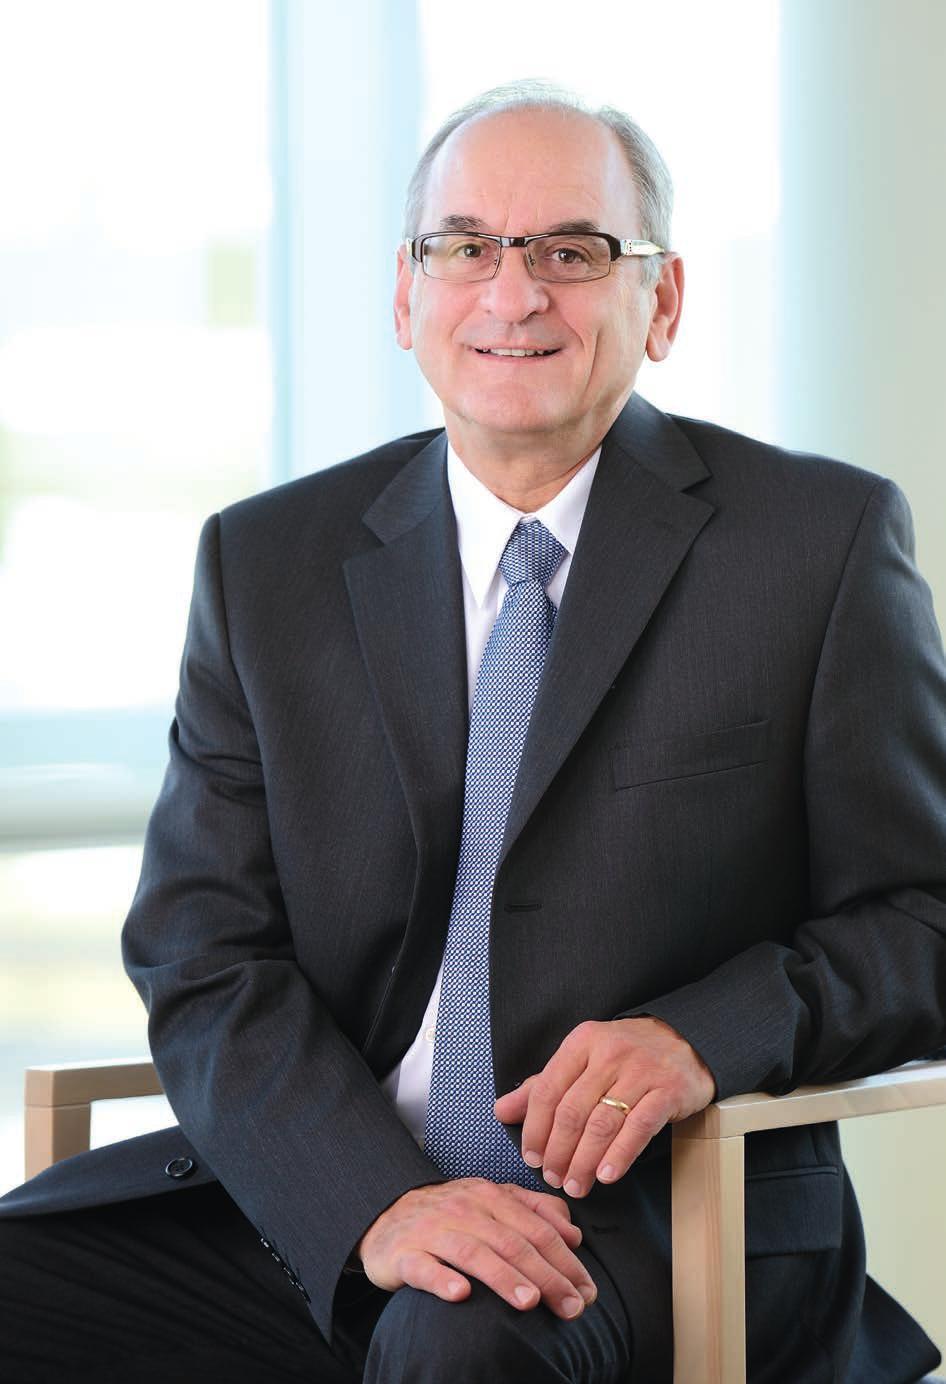 Bob Myroniuk, Executive Director of the Real Estate Council of Alberta. Mr. Myroniuk has served as RECA s Executive Director since its inception on July 1, 1996.